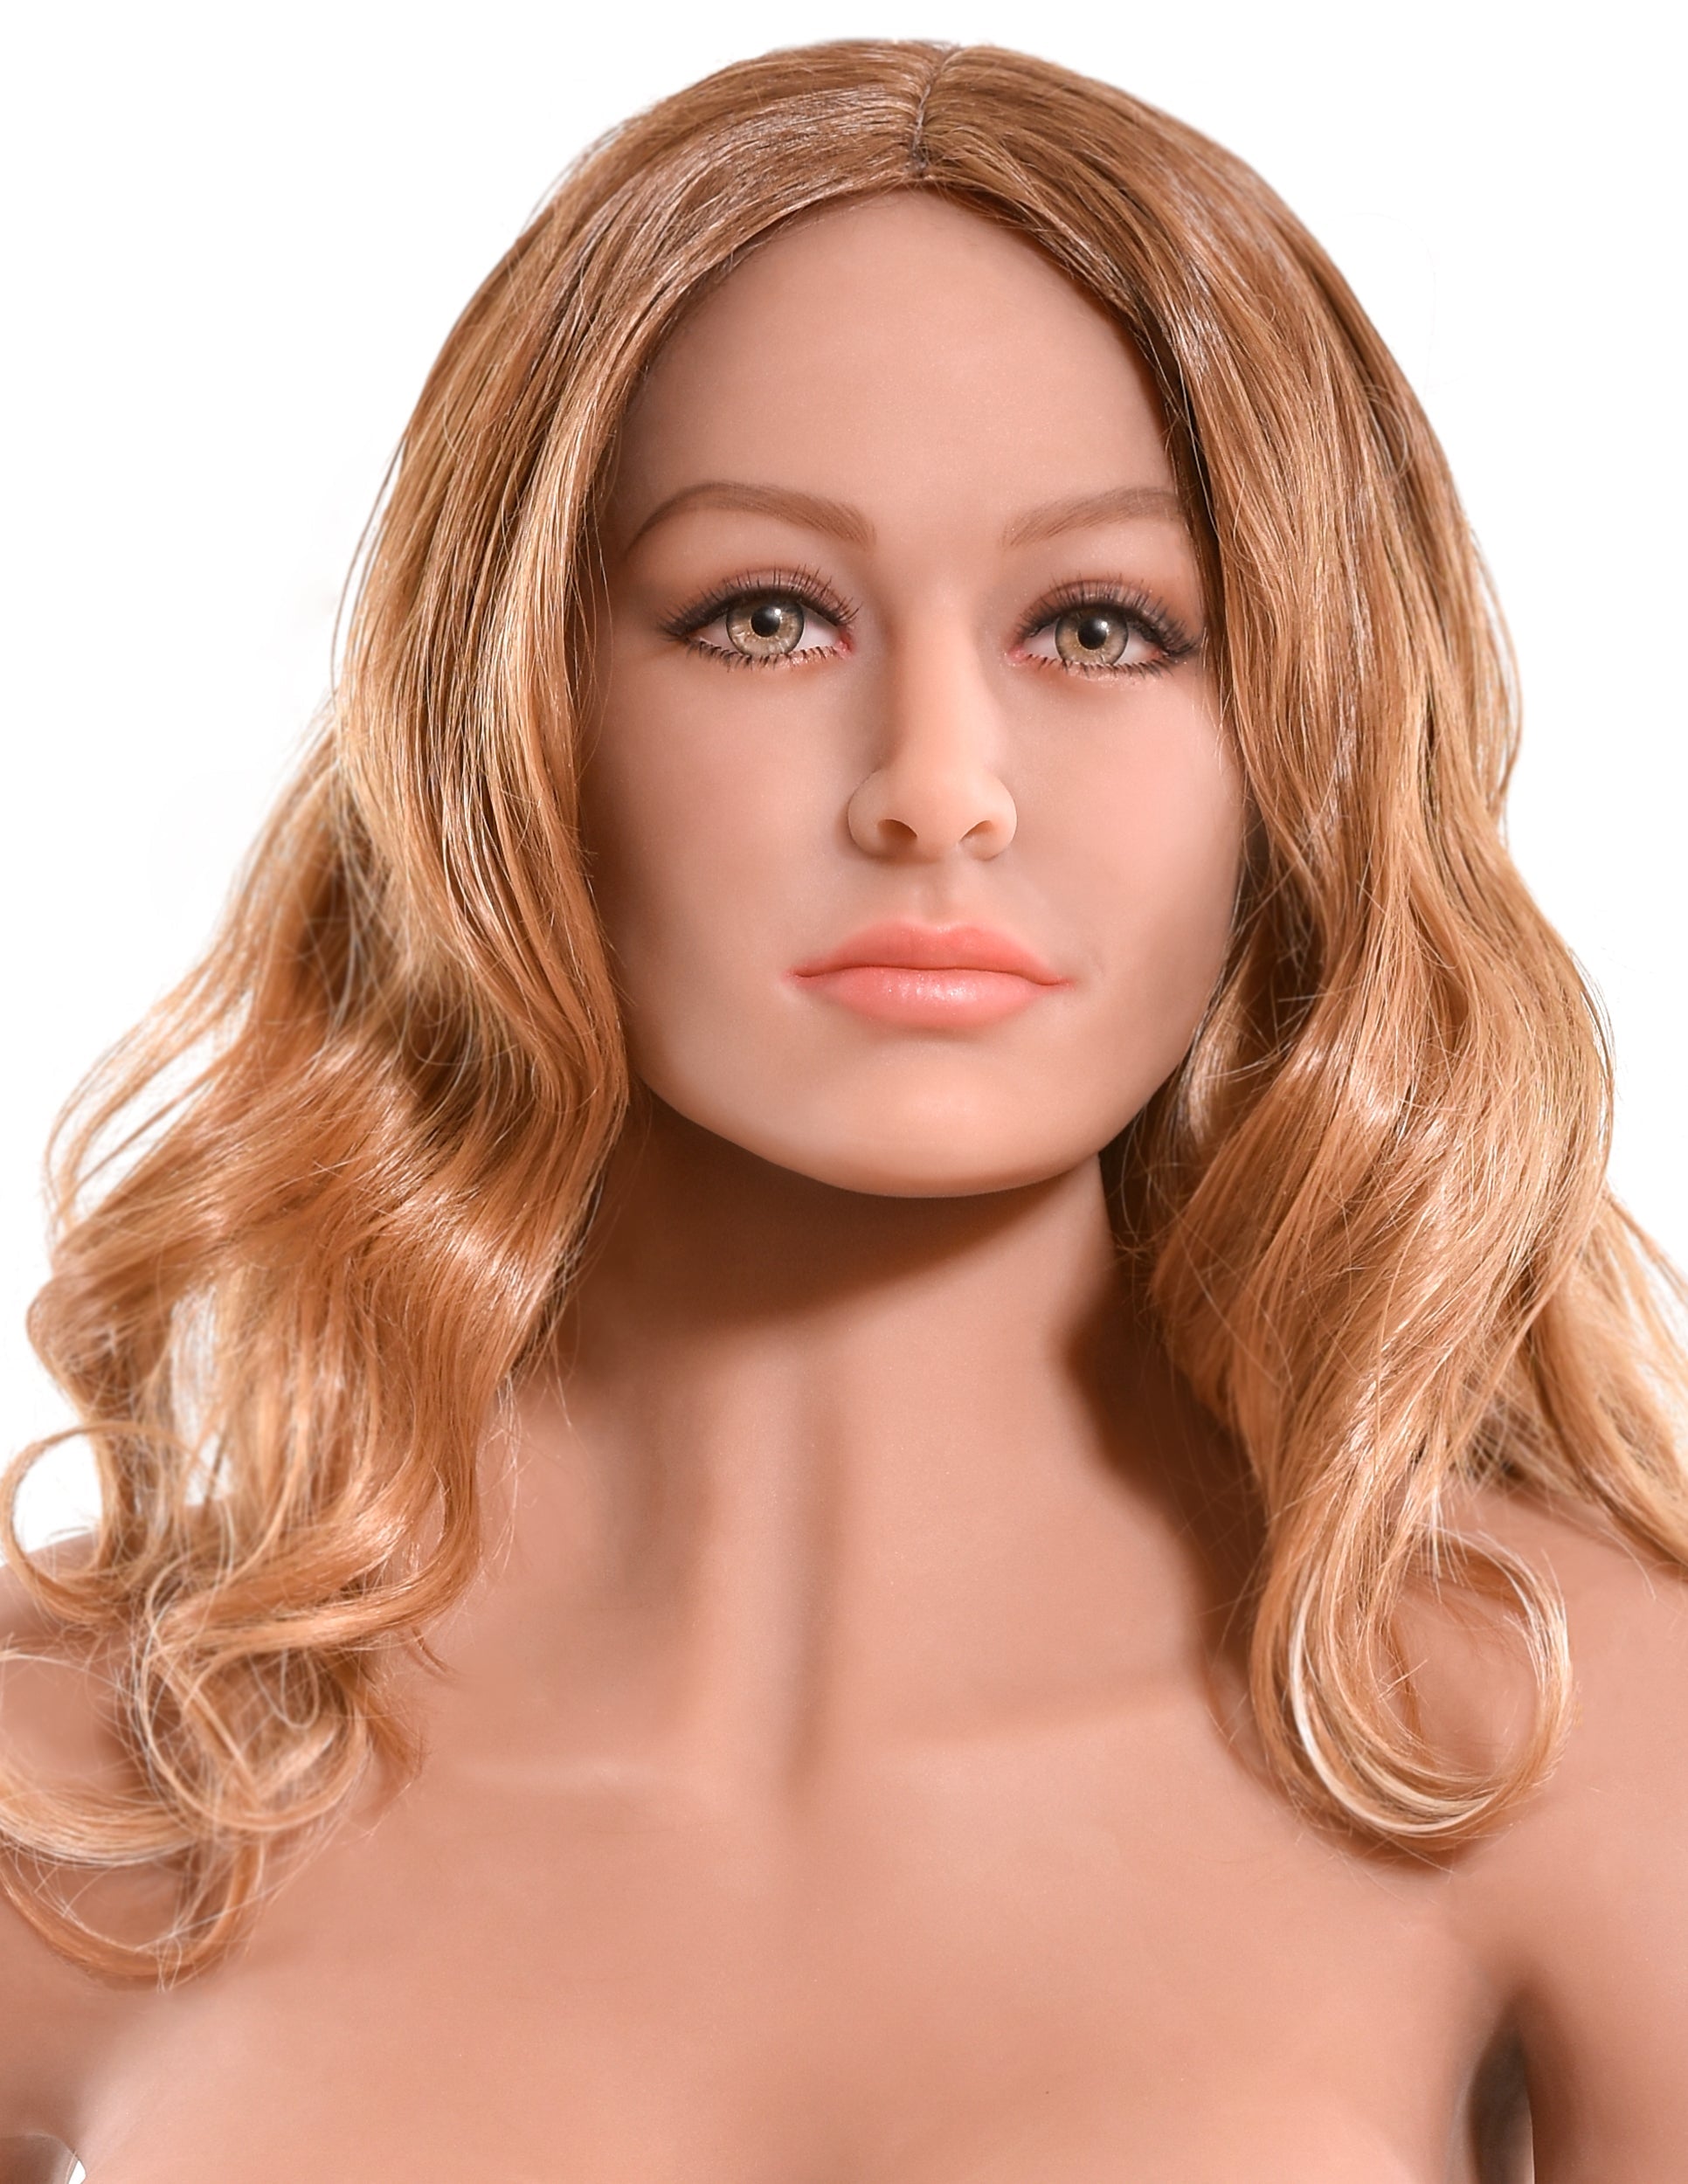 Pipedream Products Ultimate Fantasy Doll Bianca - XOXTOYS